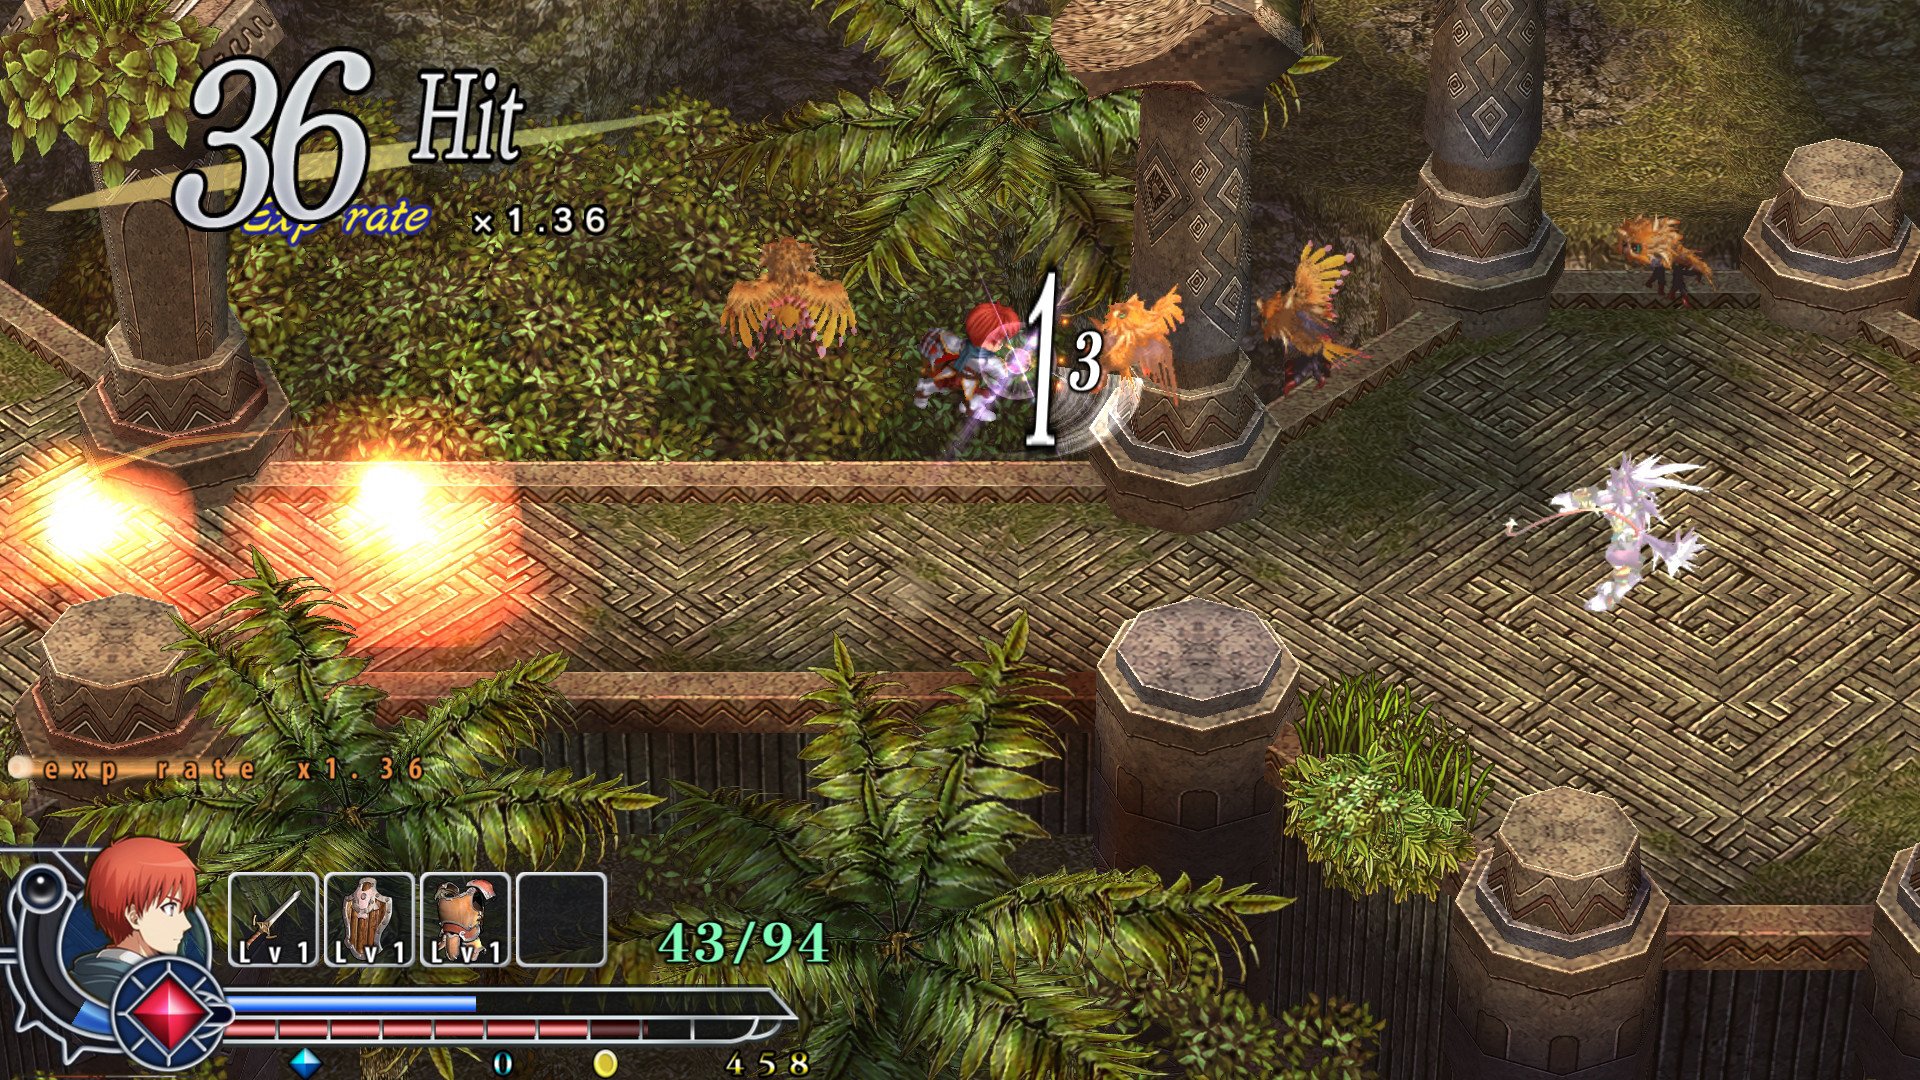 Ys Memoire: The Oath in Felghana coming to PS5, PS4 on May 23 in